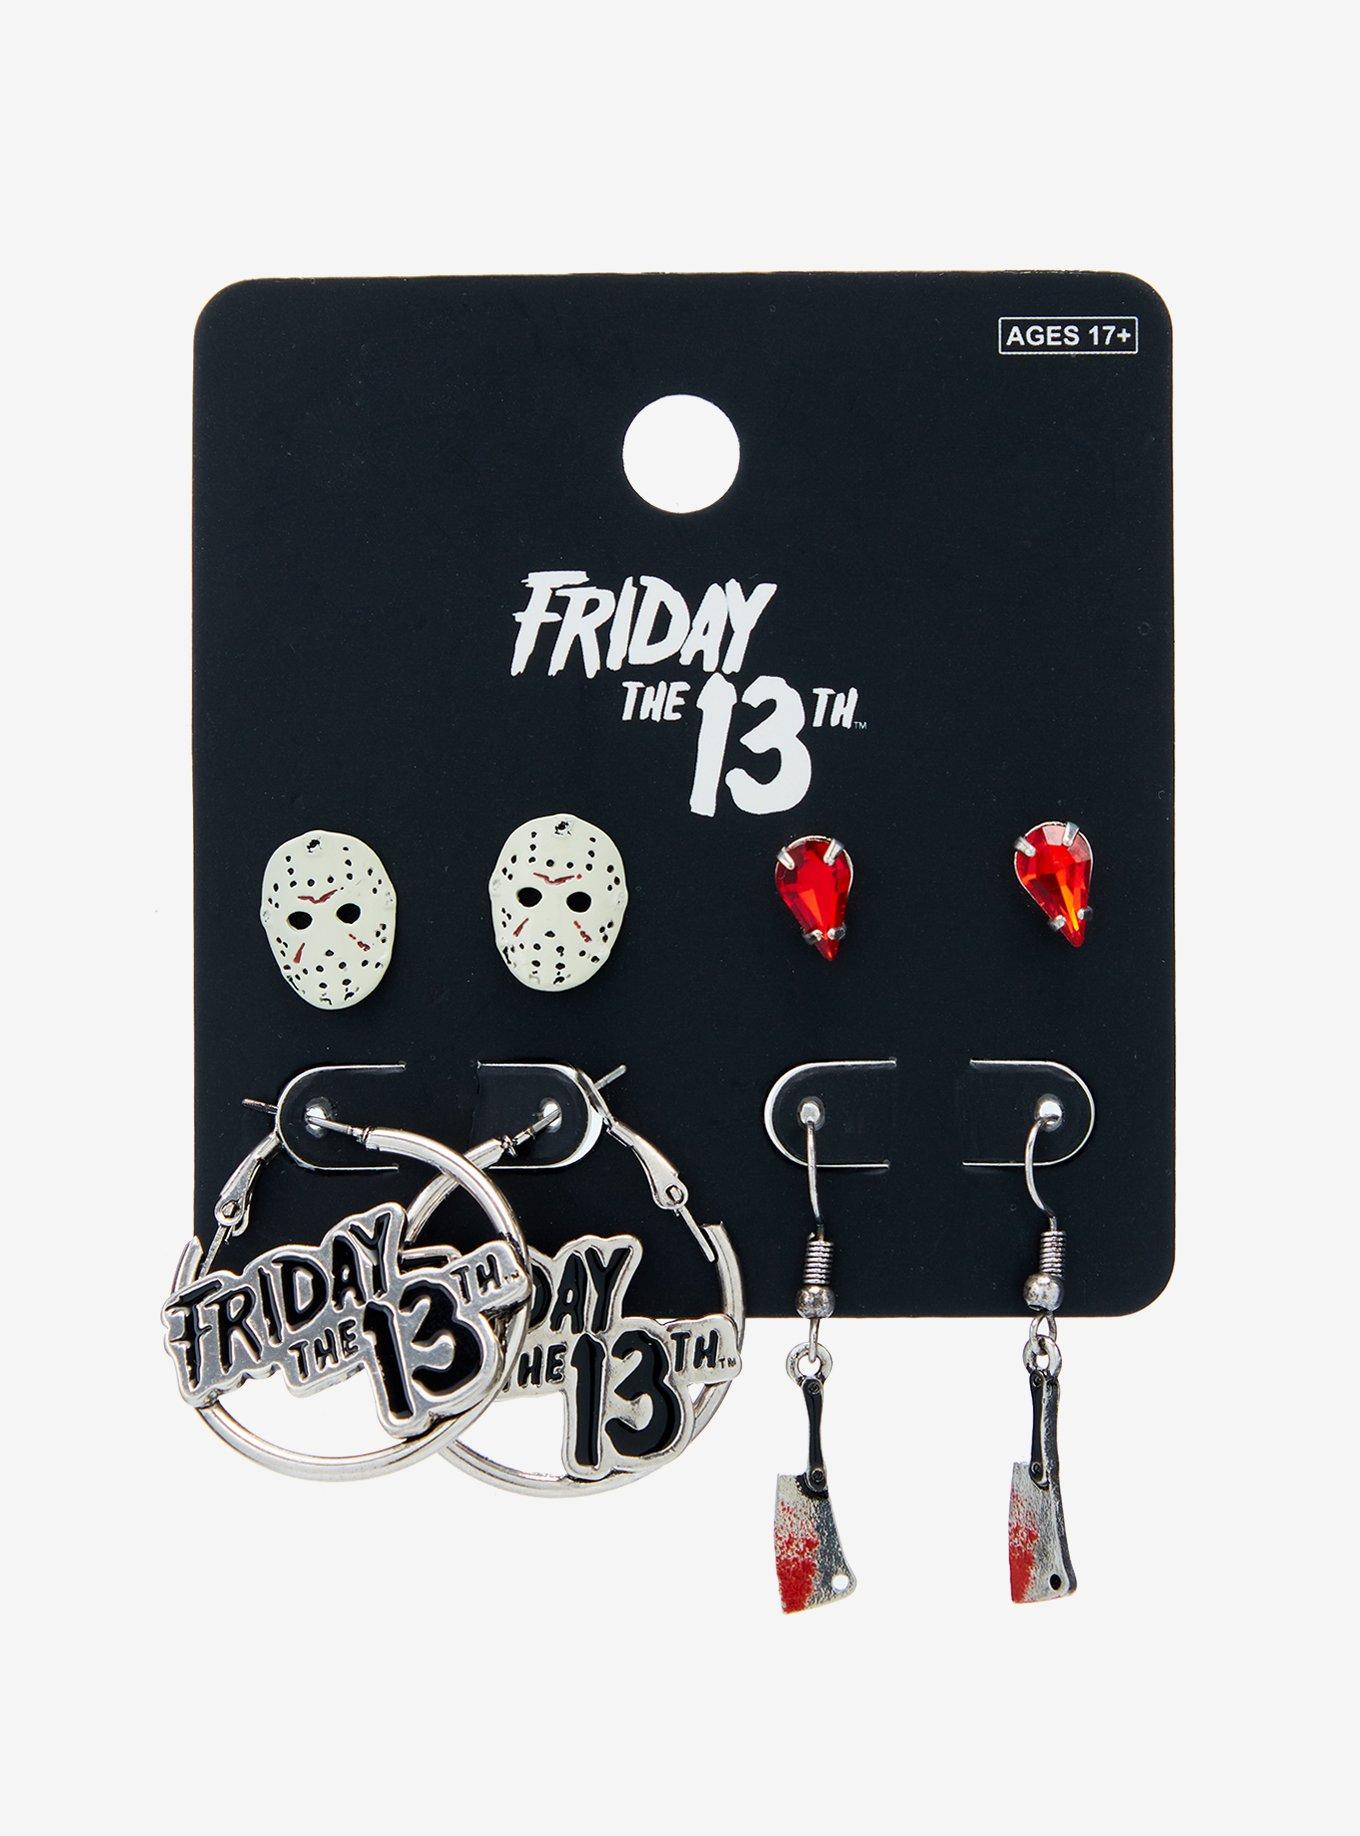 Friday The 13th Icons Earring Set